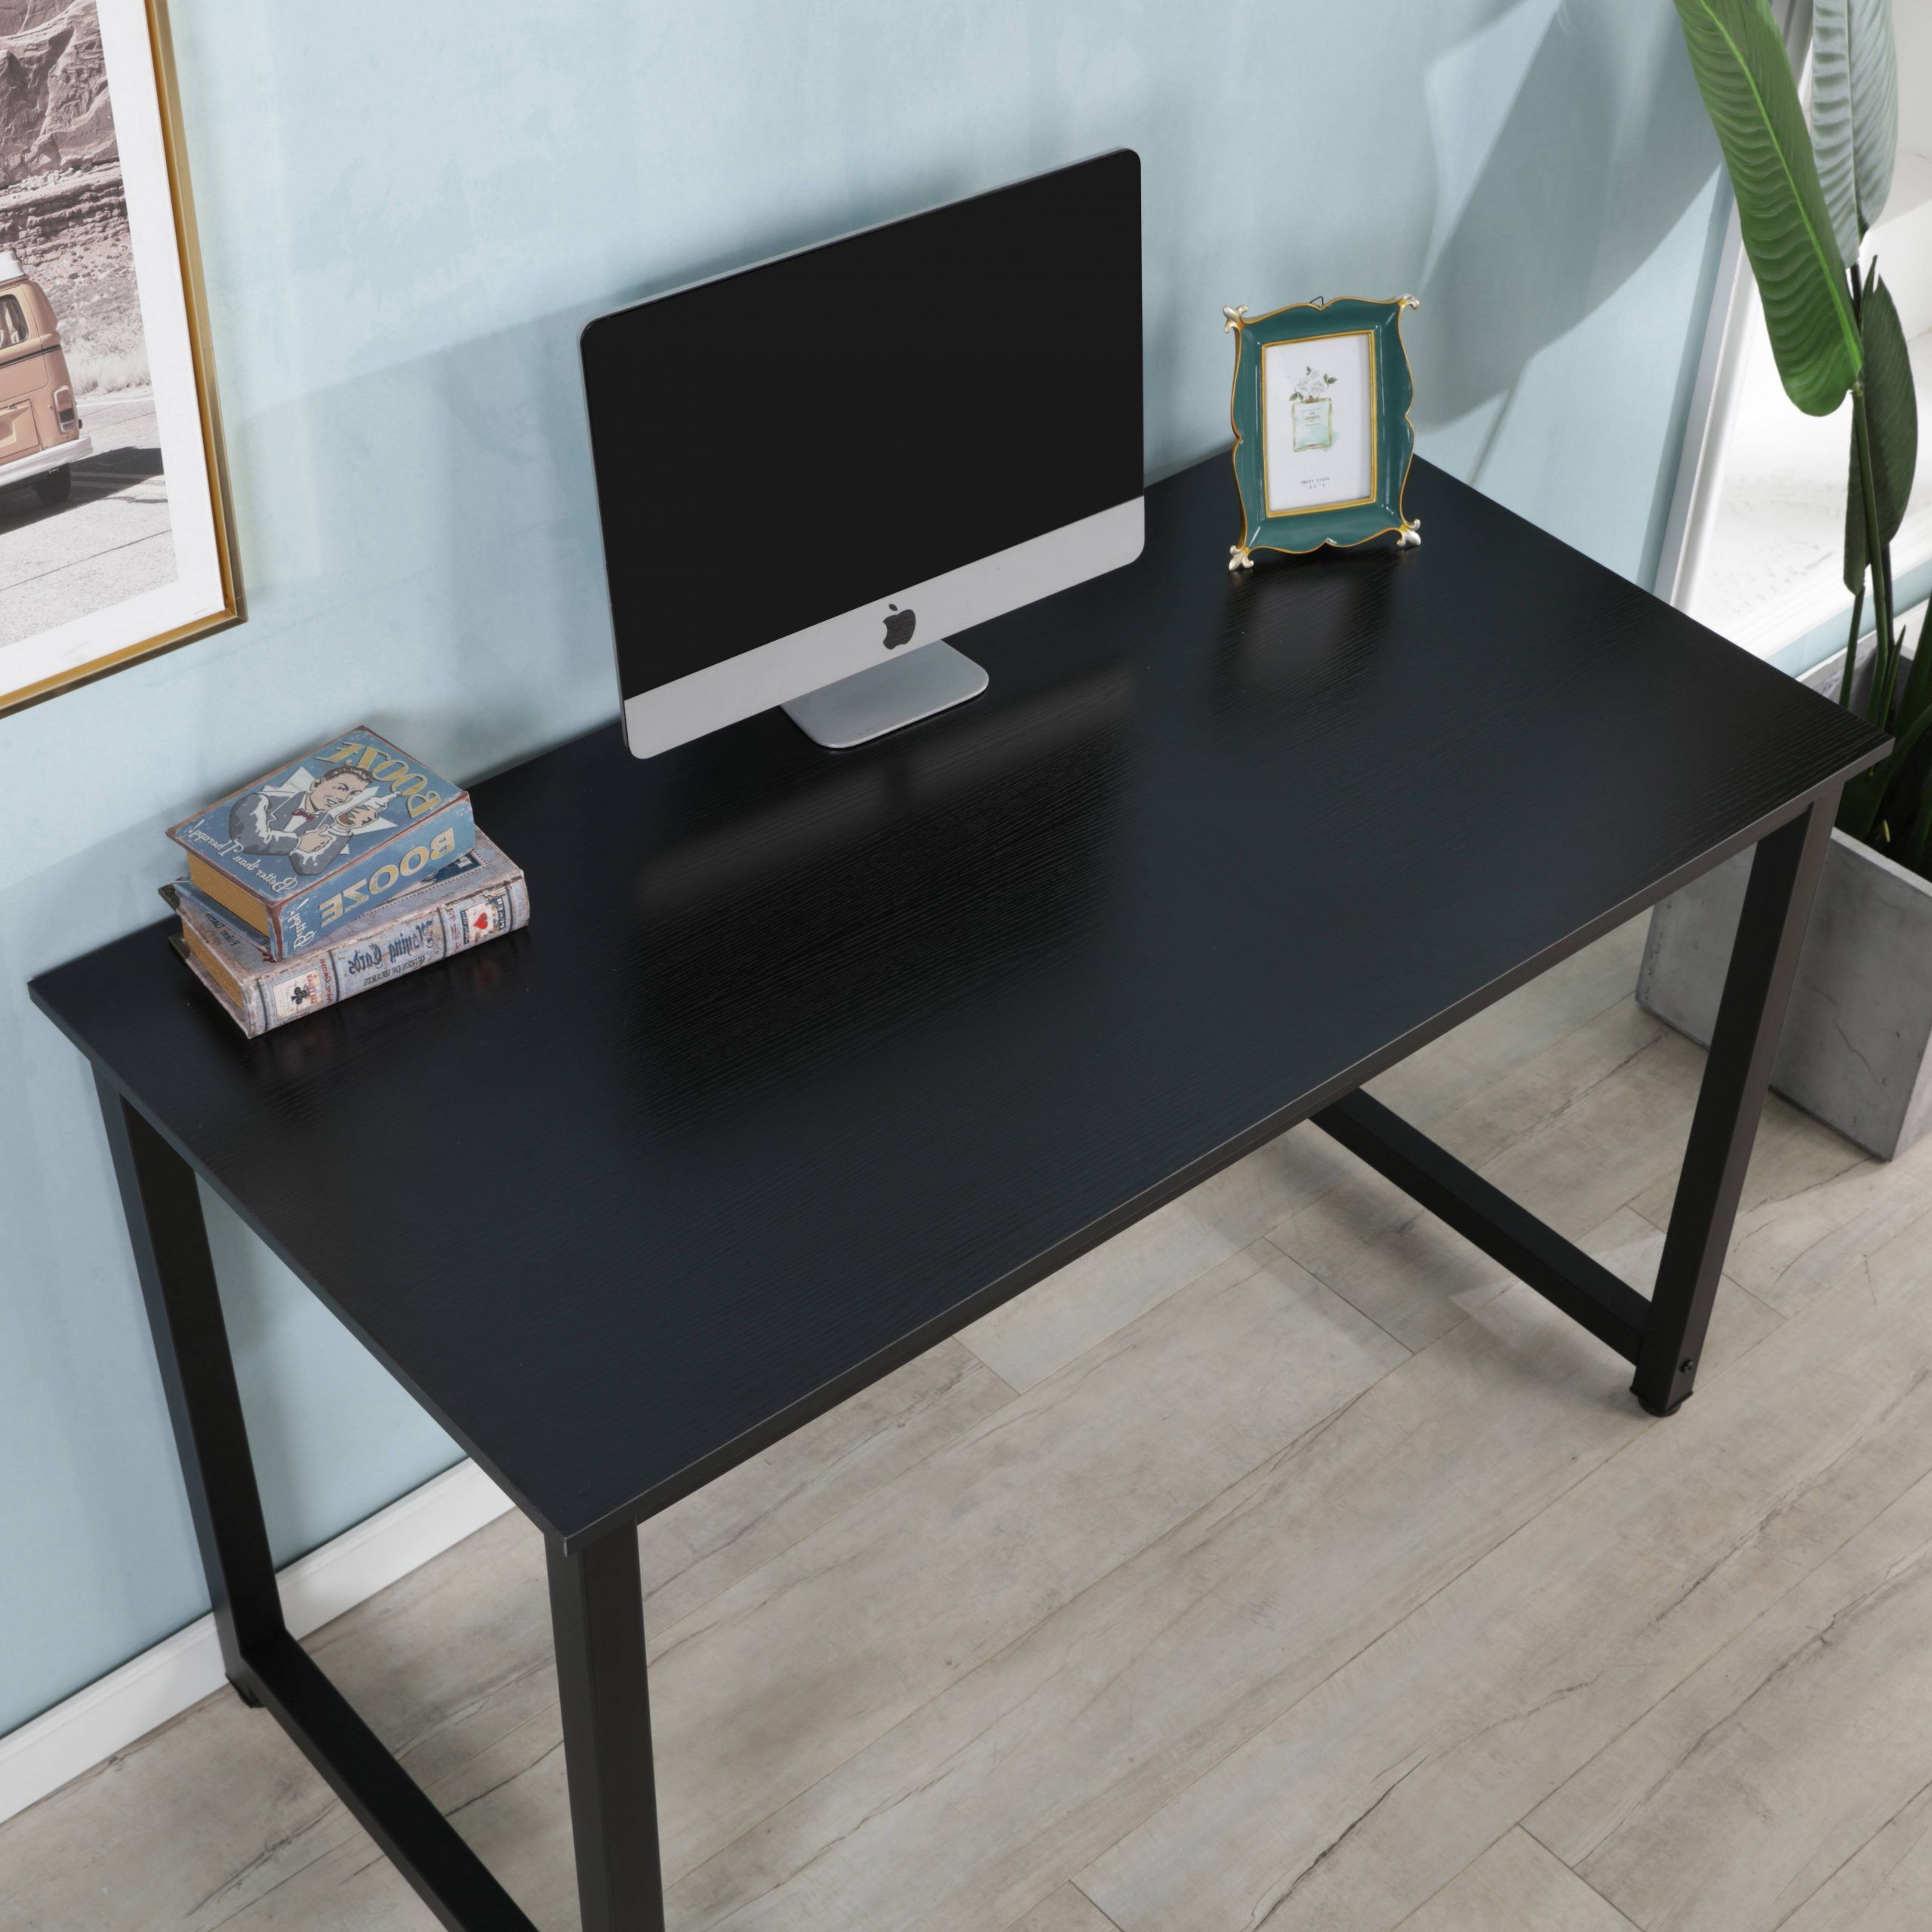 2018 Urhomepro Computer Desk, Modern Simple Home Office Corner Computer Within Natural Wood And Black Metal Office Desks (View 7 of 15)